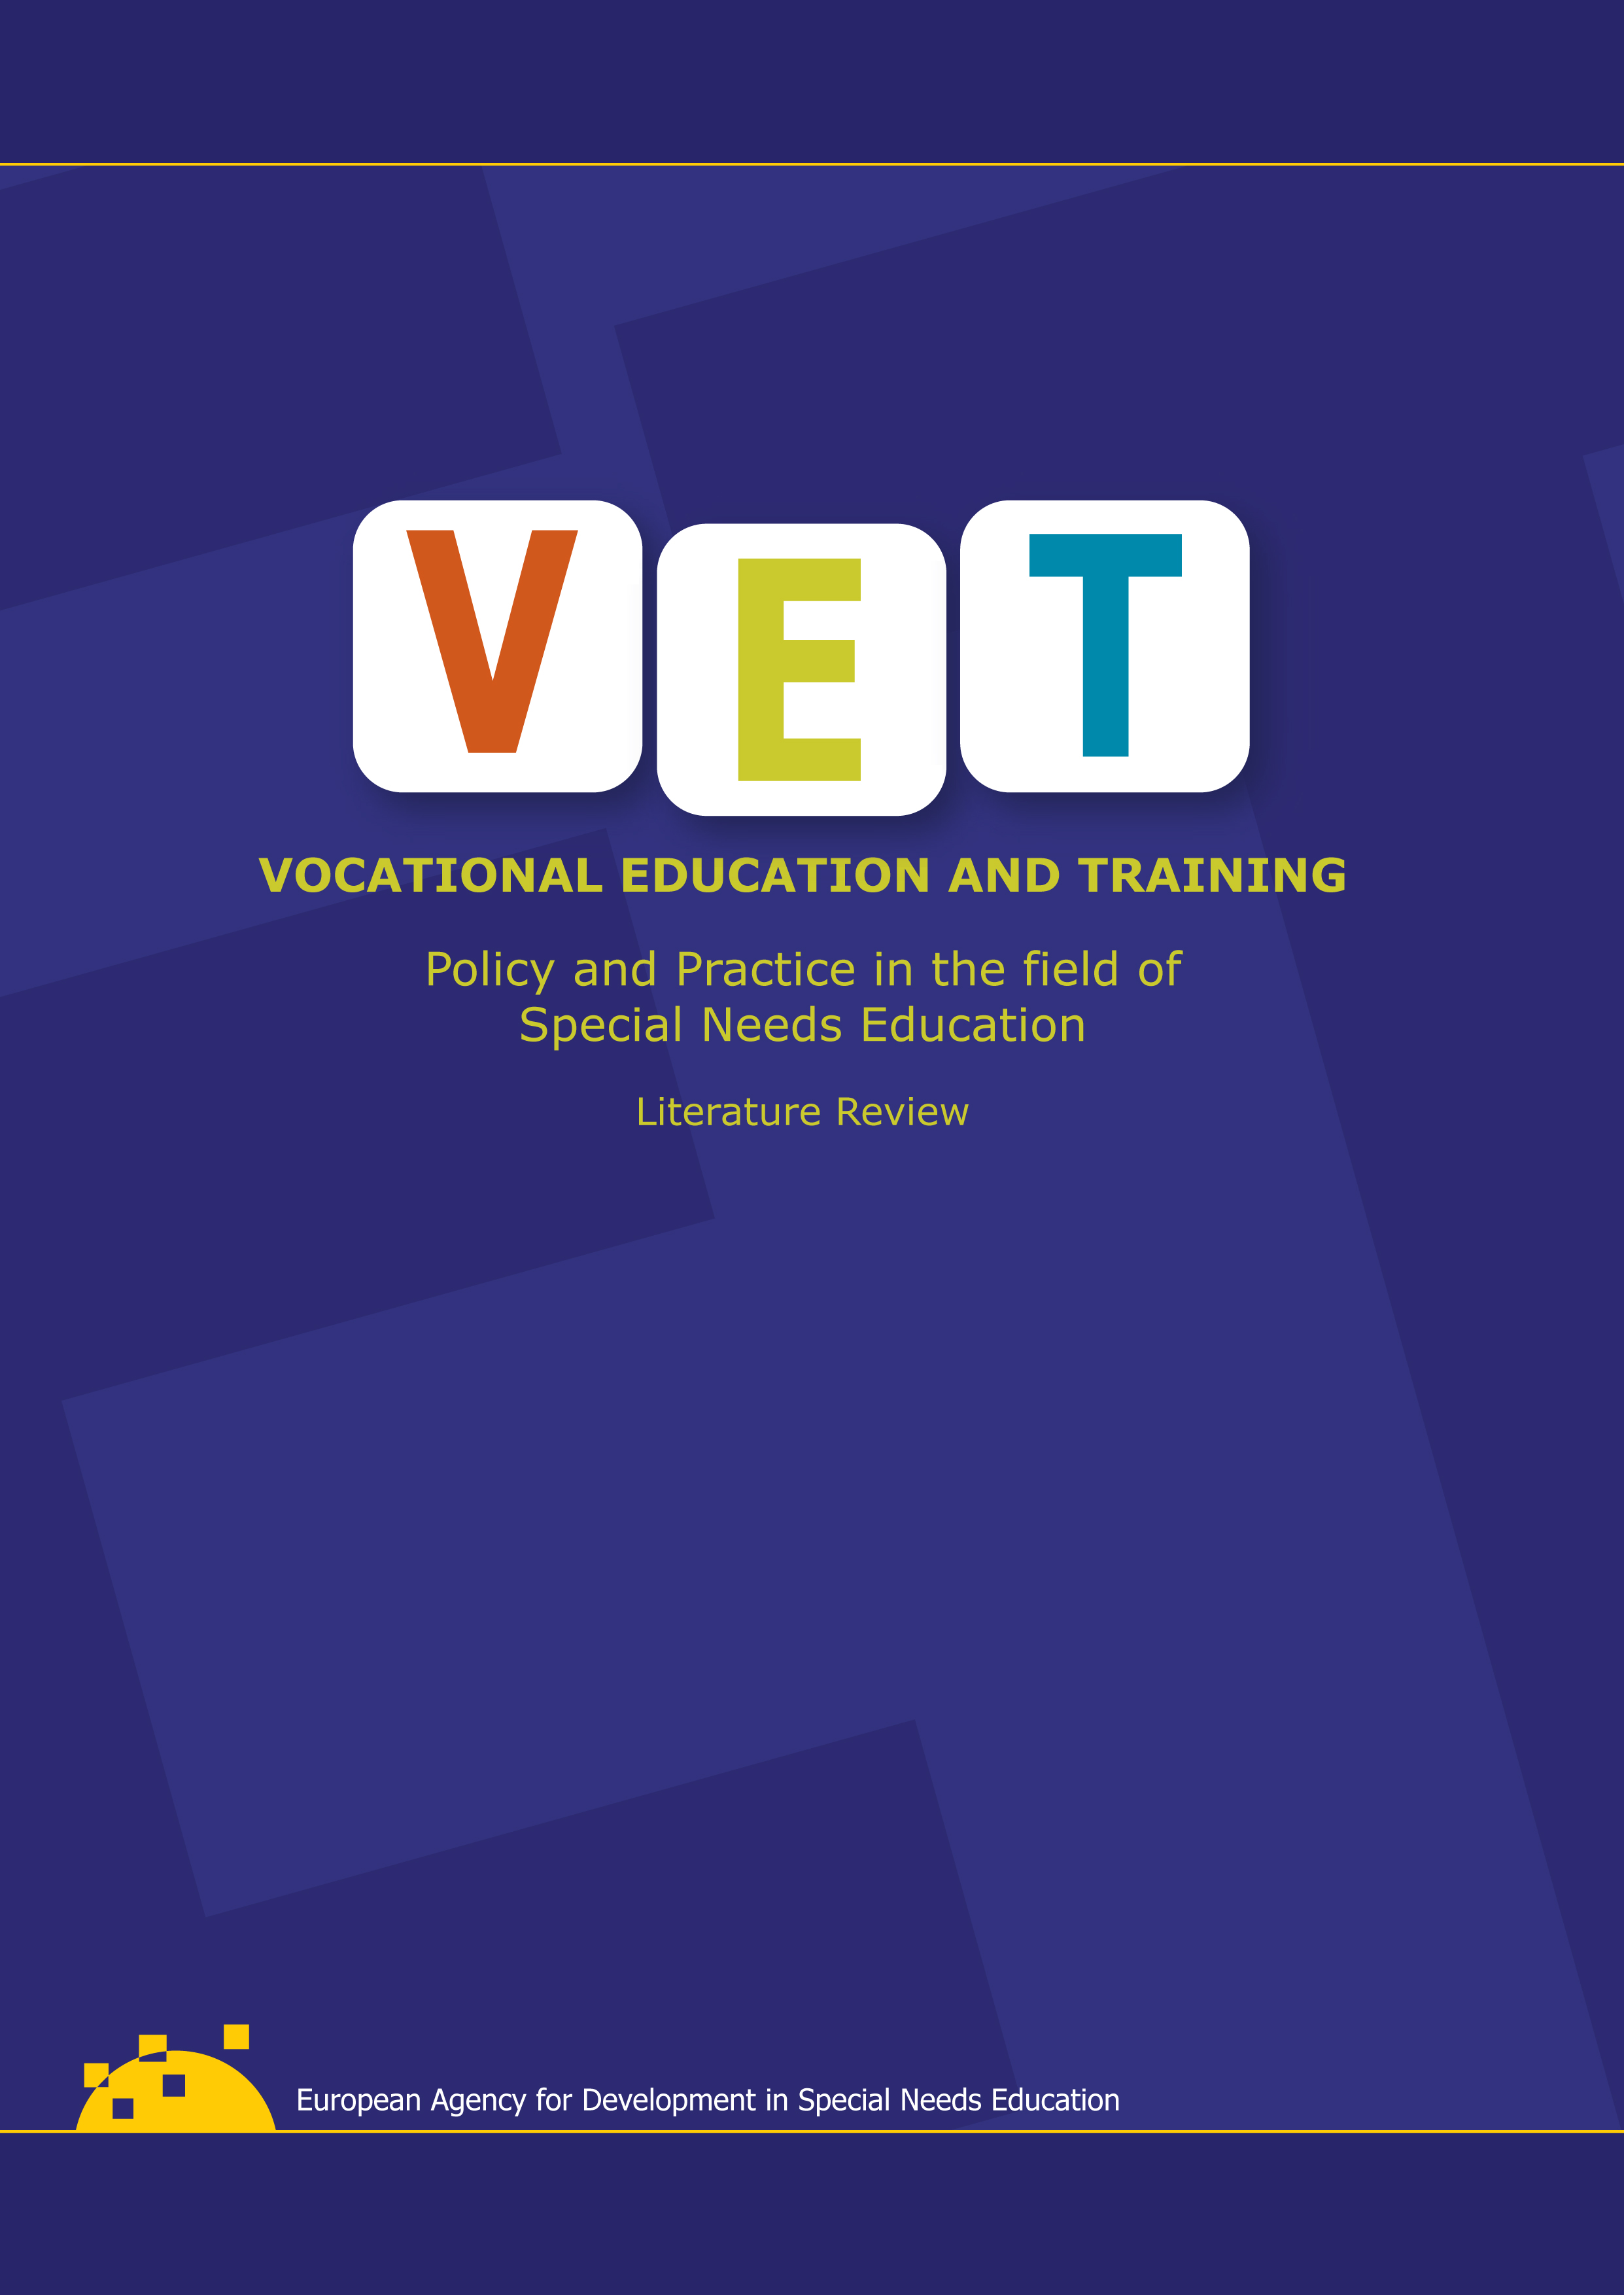 Vocational Education and Training: Policy and Practice in the field of Special Needs Education – Literature Review